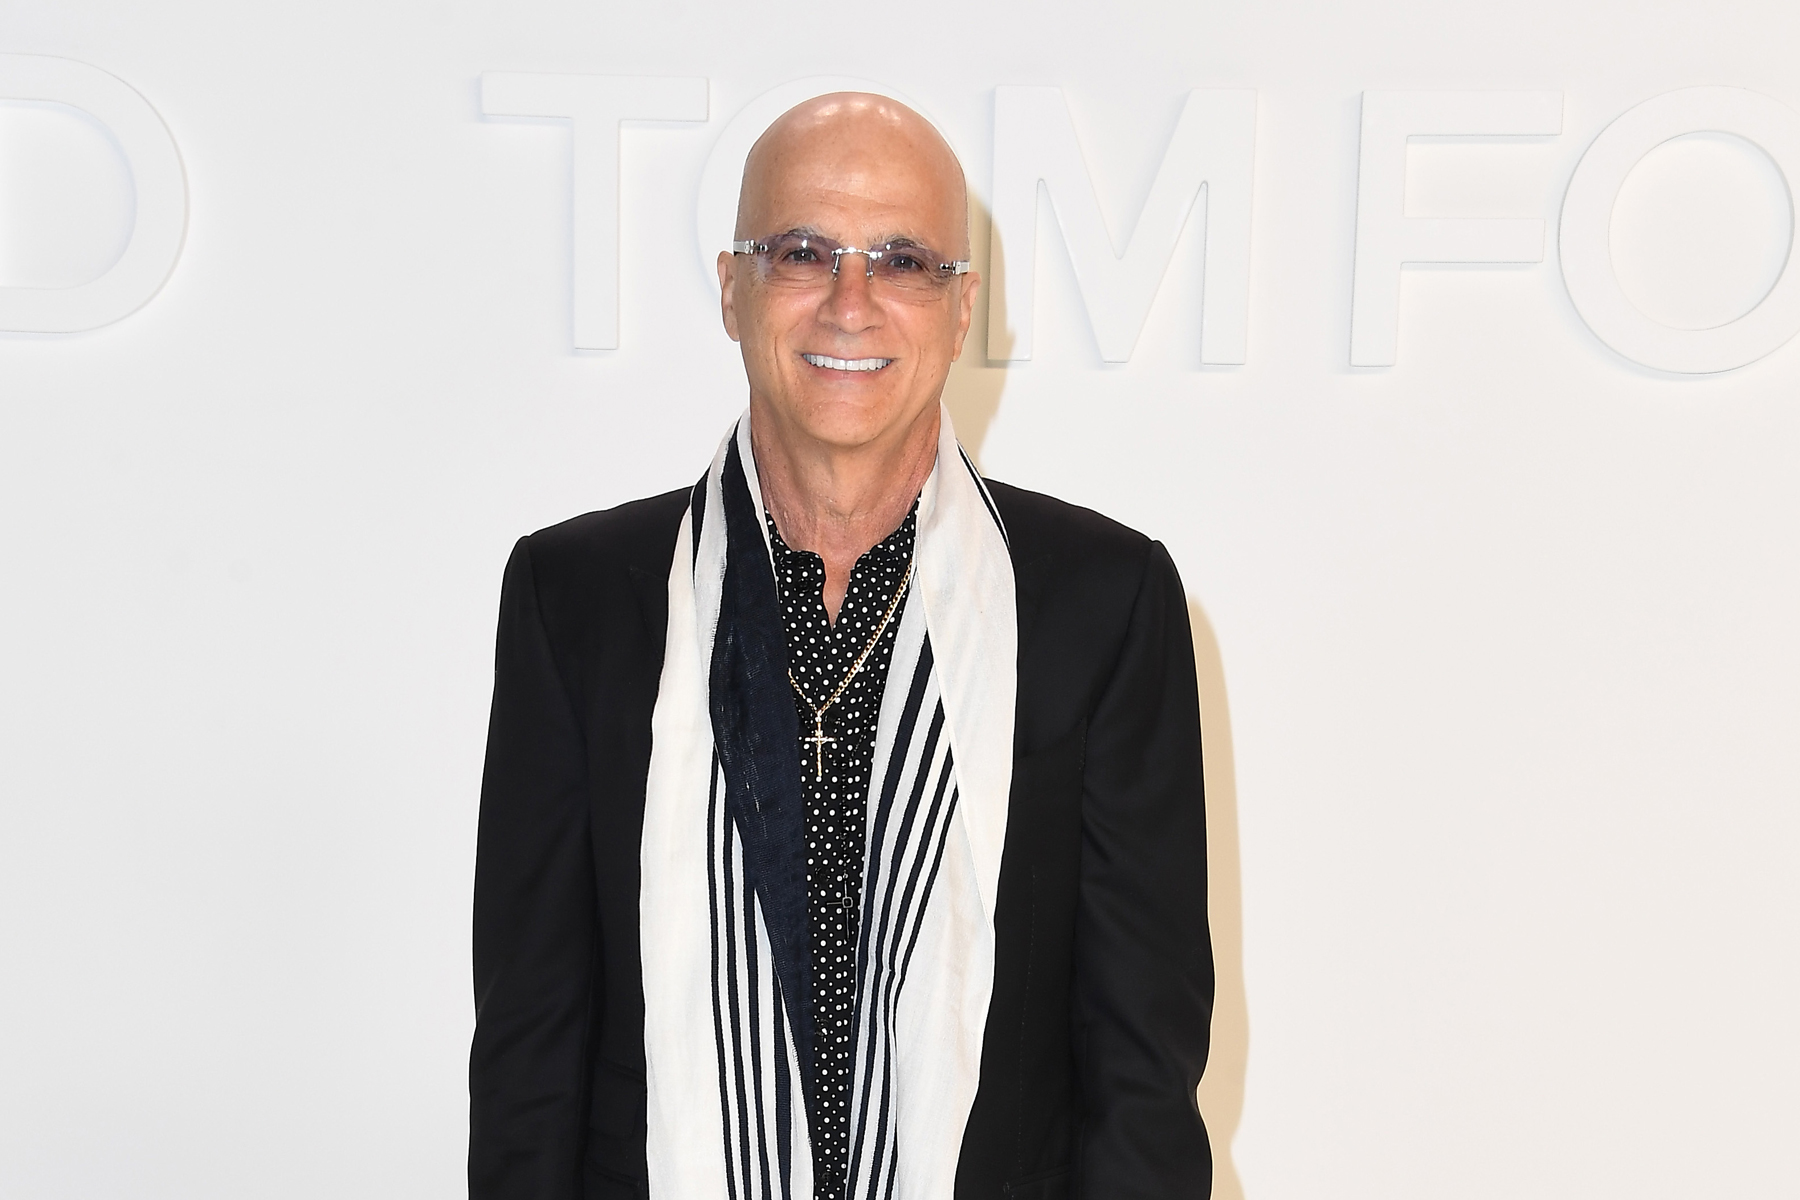 Music Magnate Jimmy Iovine Is Wading Into the Fashion Business